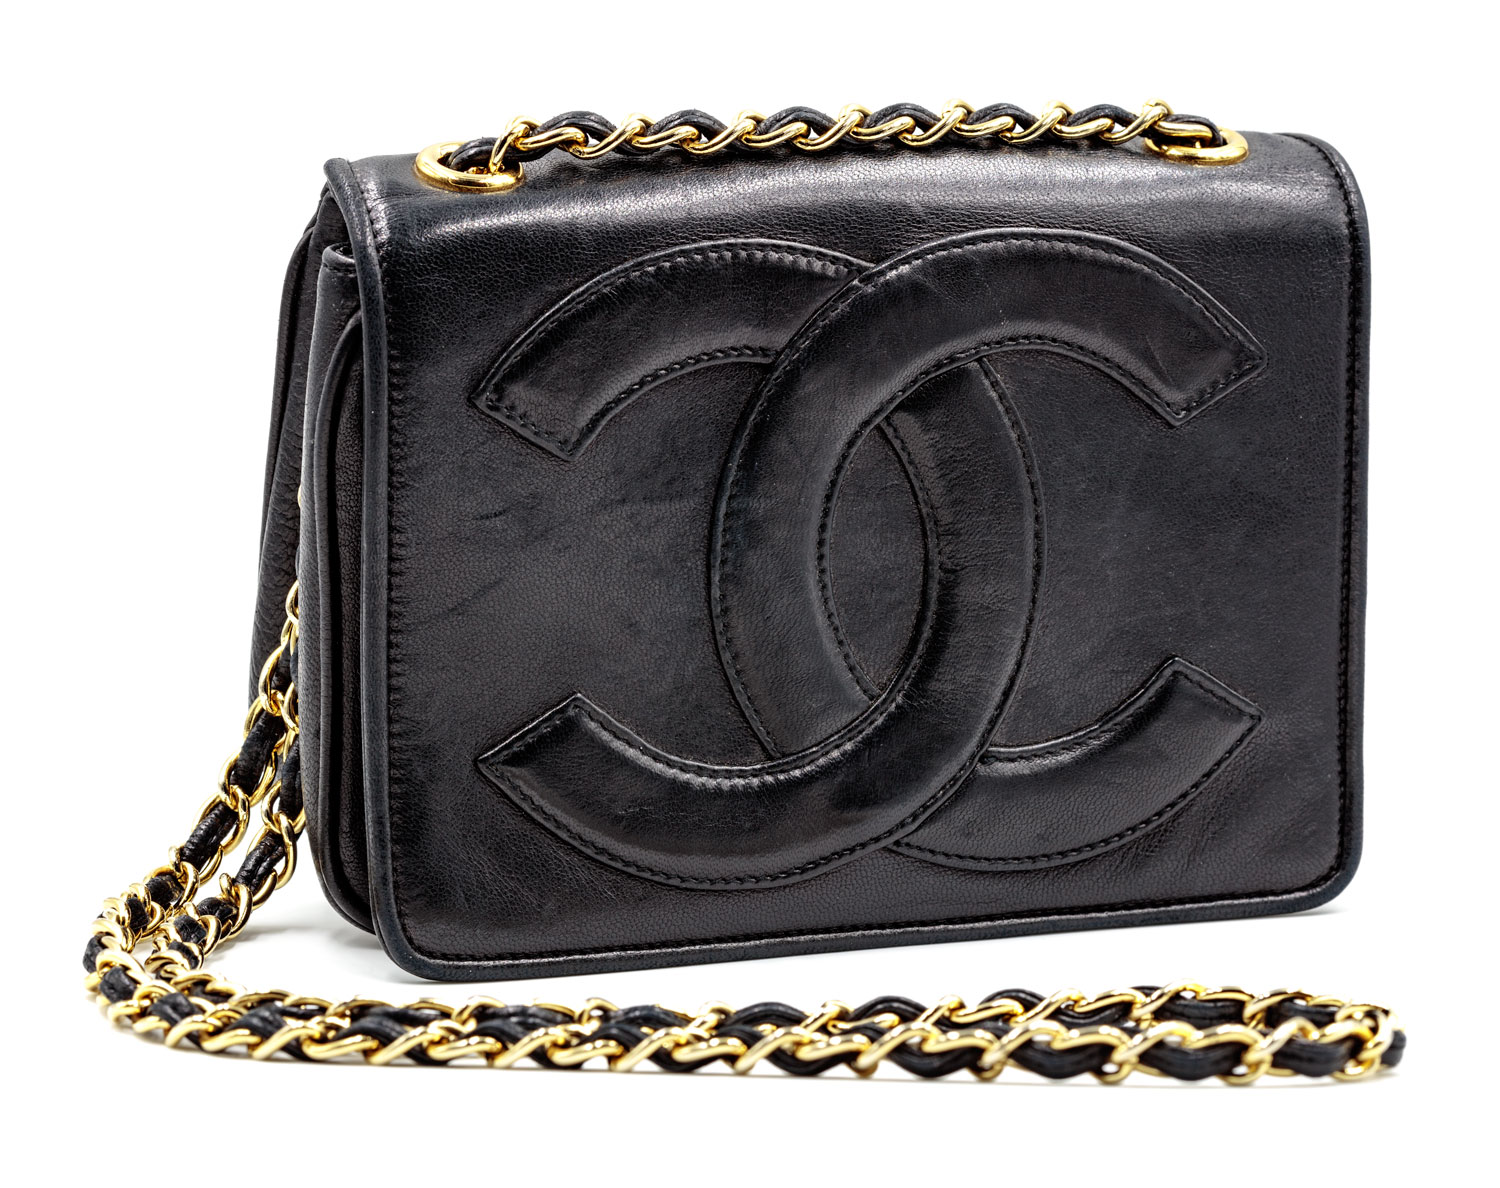 Coco curve leather handbag Chanel Black in Leather - 25250608